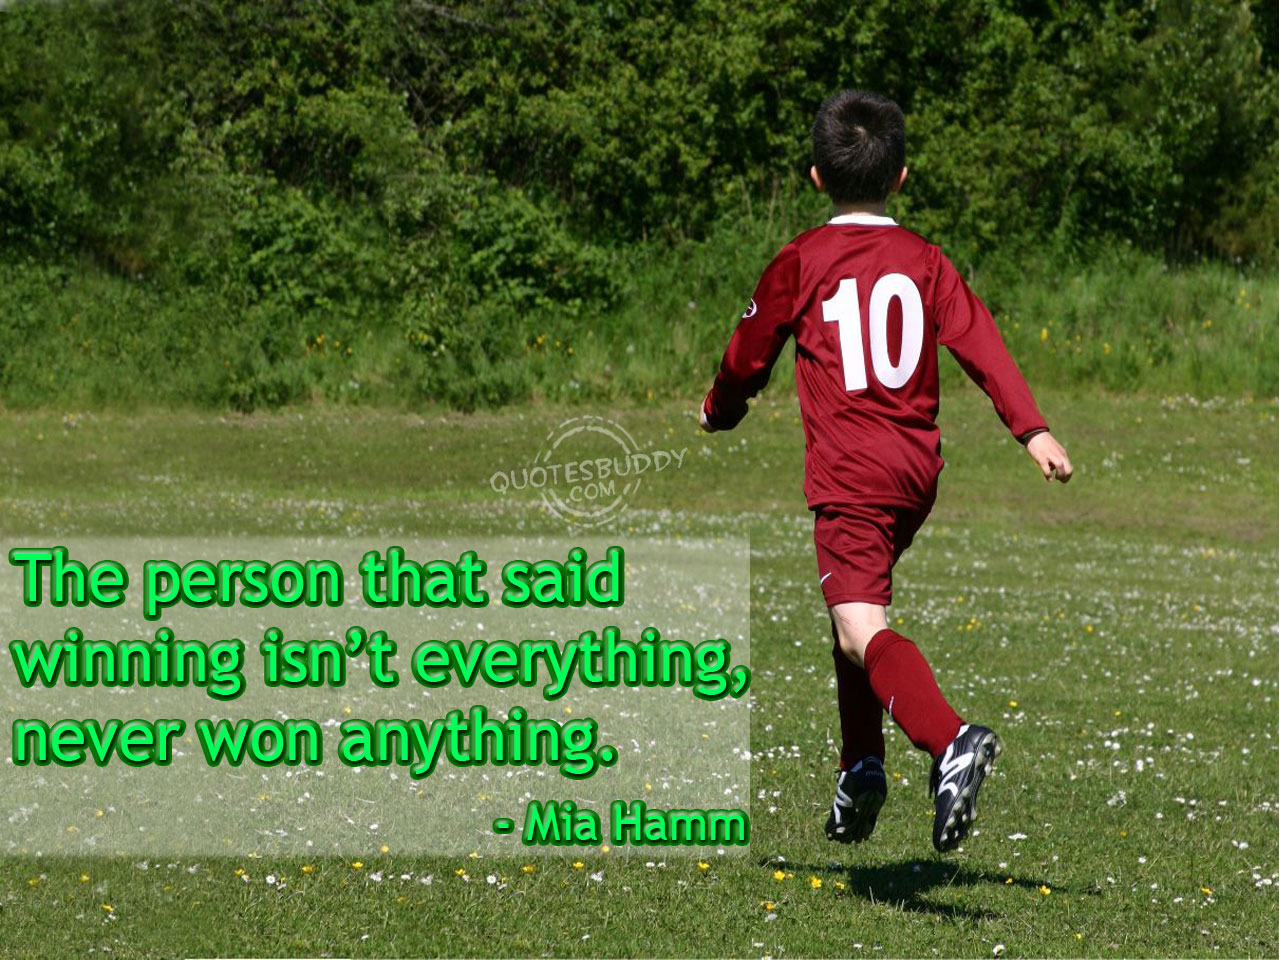 soccer quotes wallpaper,player,soccer player,football player,football,tournament